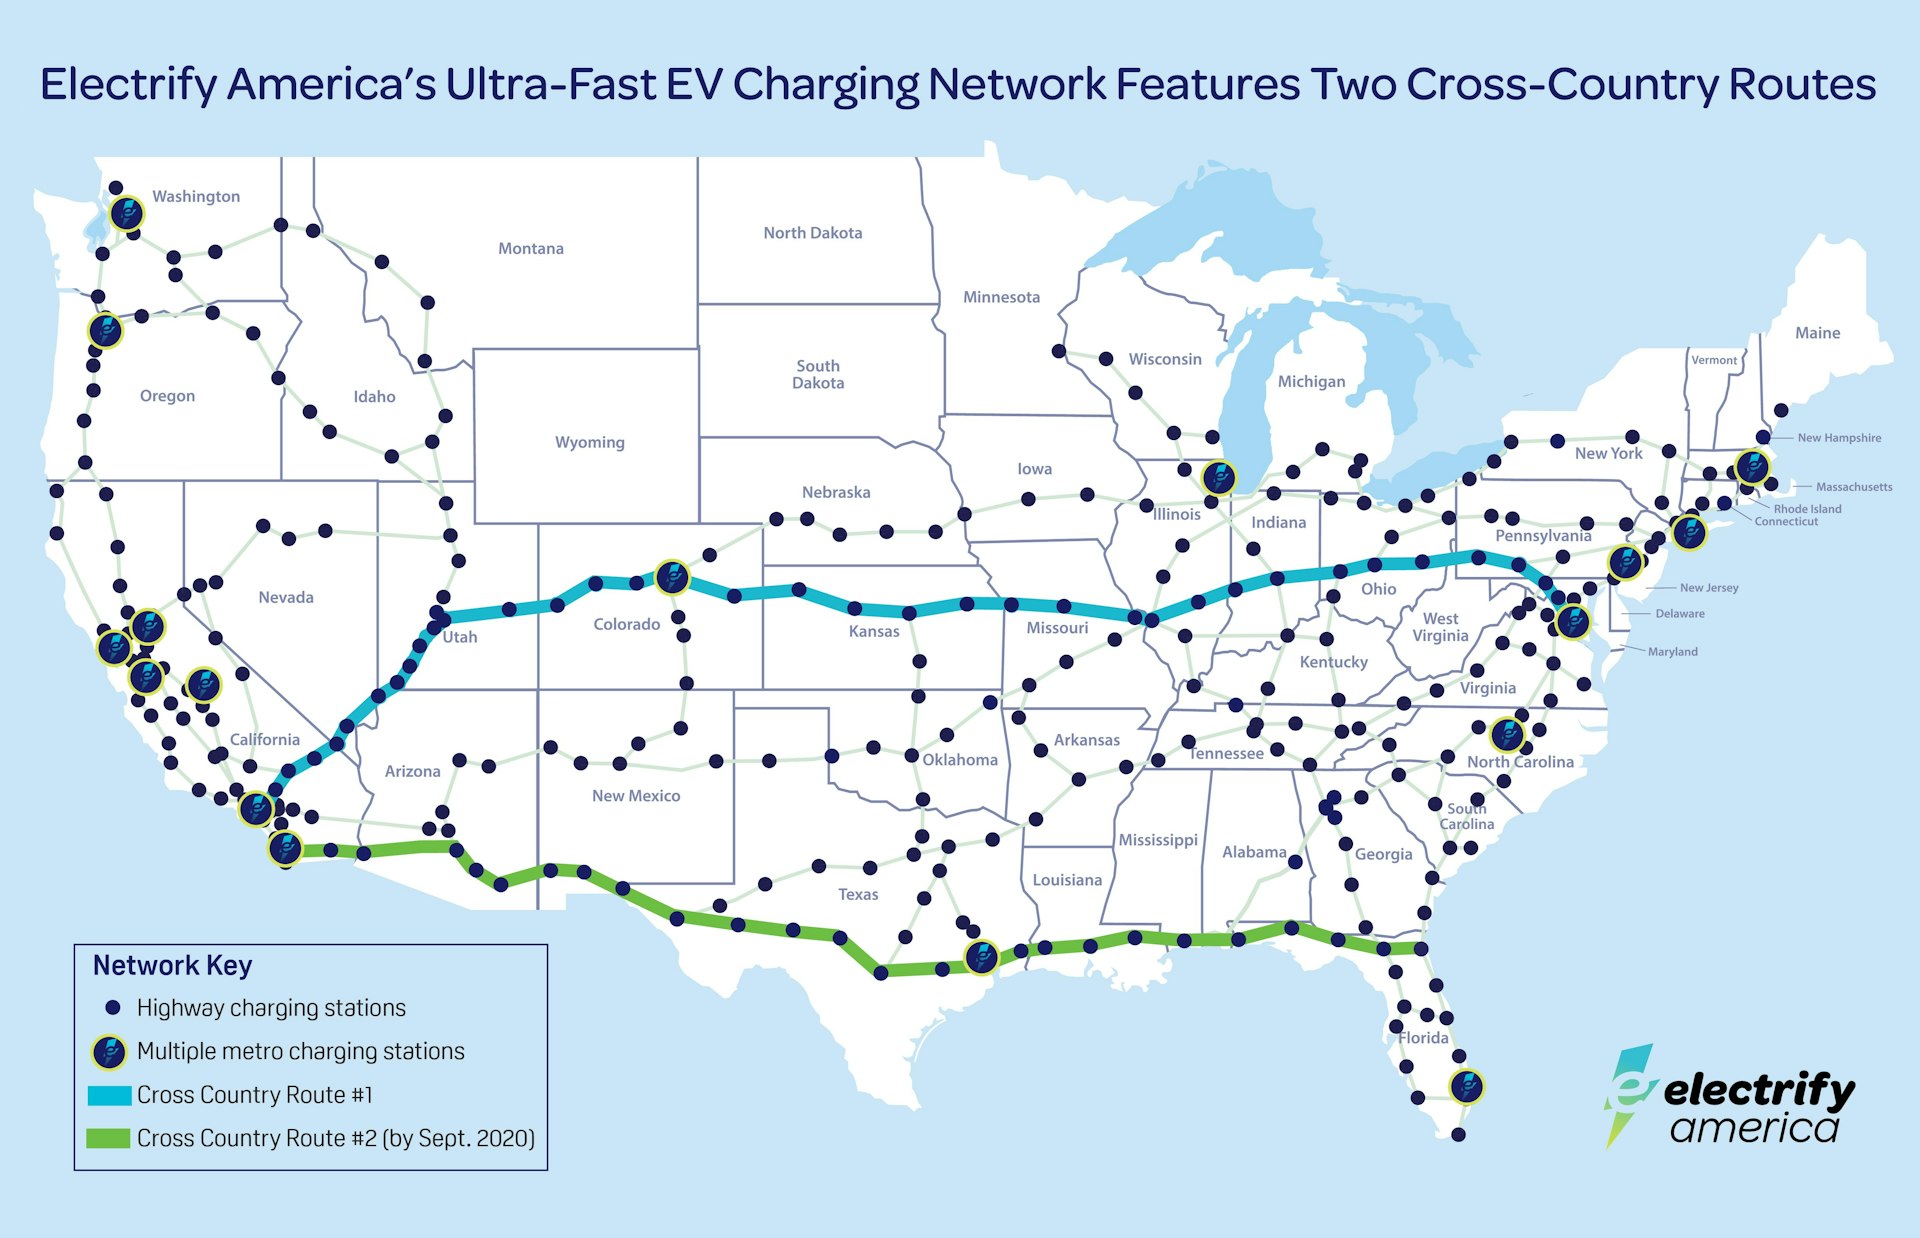 Large-Electrify-America-Completes-Its-First-of-Two-Electric-Vehicle-Fast-Charging-Cross-Country-Routes-with-the-Second-Route-Across-the-United-States-to-be-Completed-by-September-445.jpg